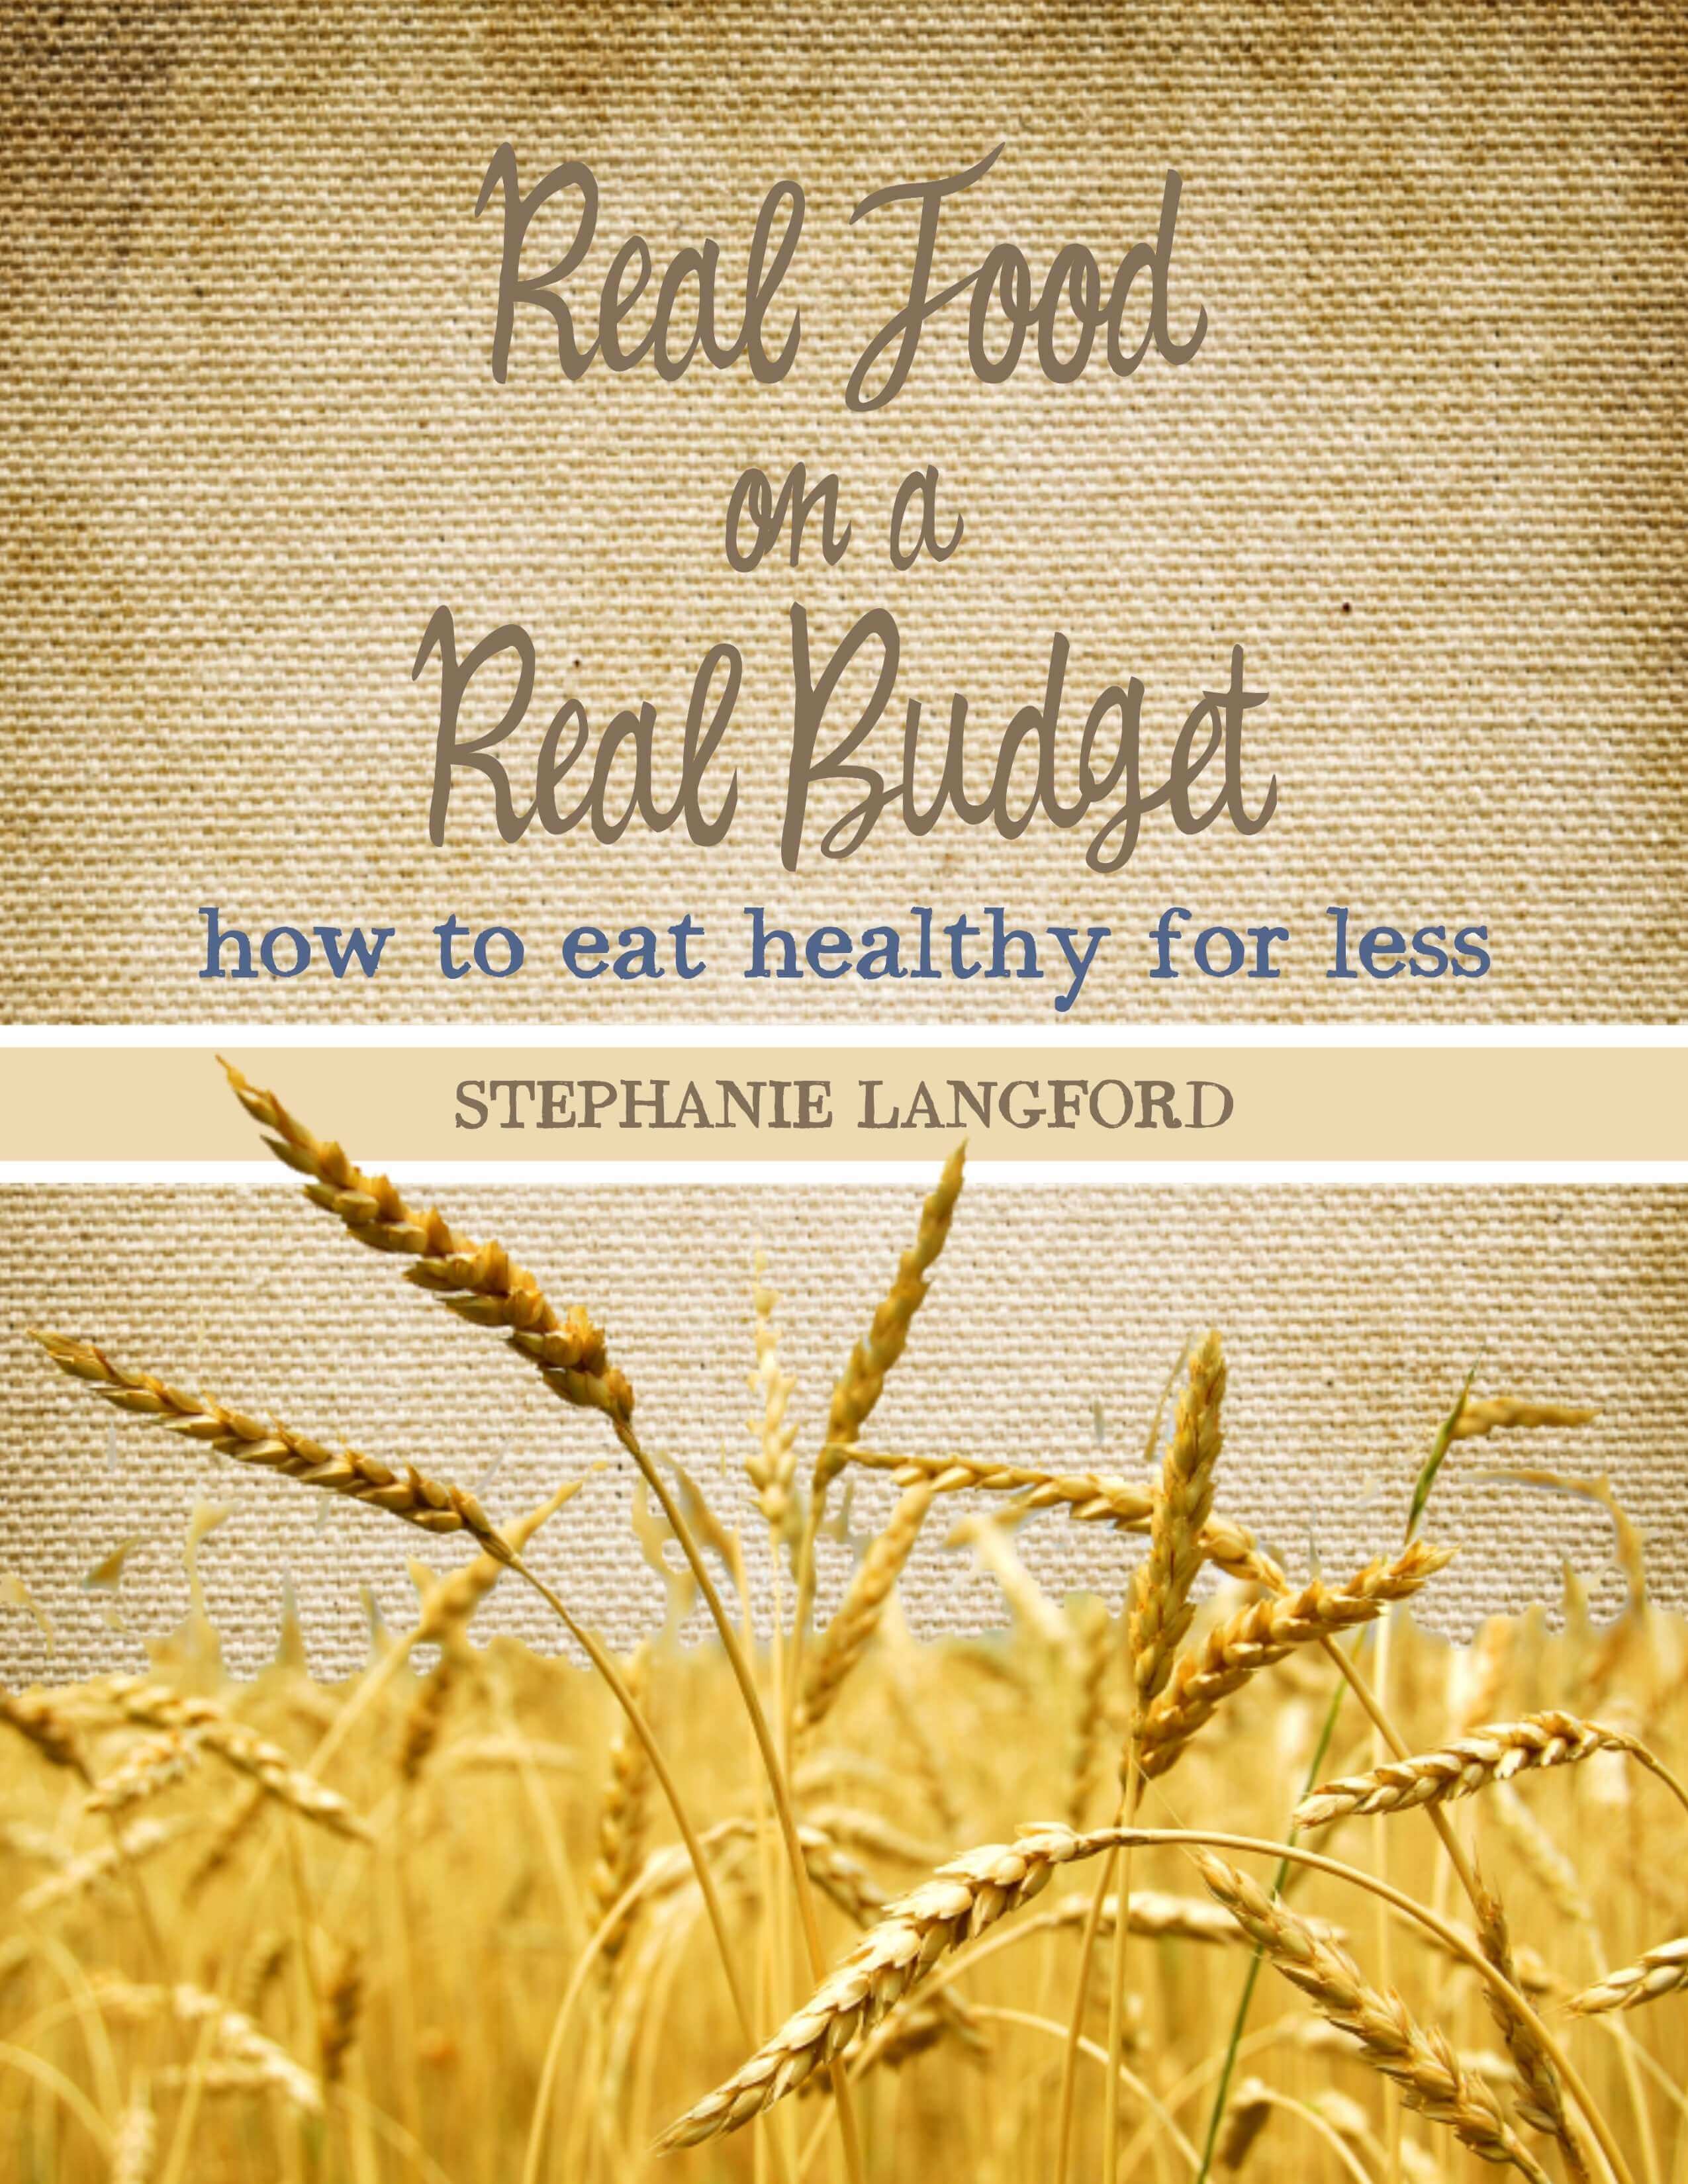 good frugal food book cover2(2)